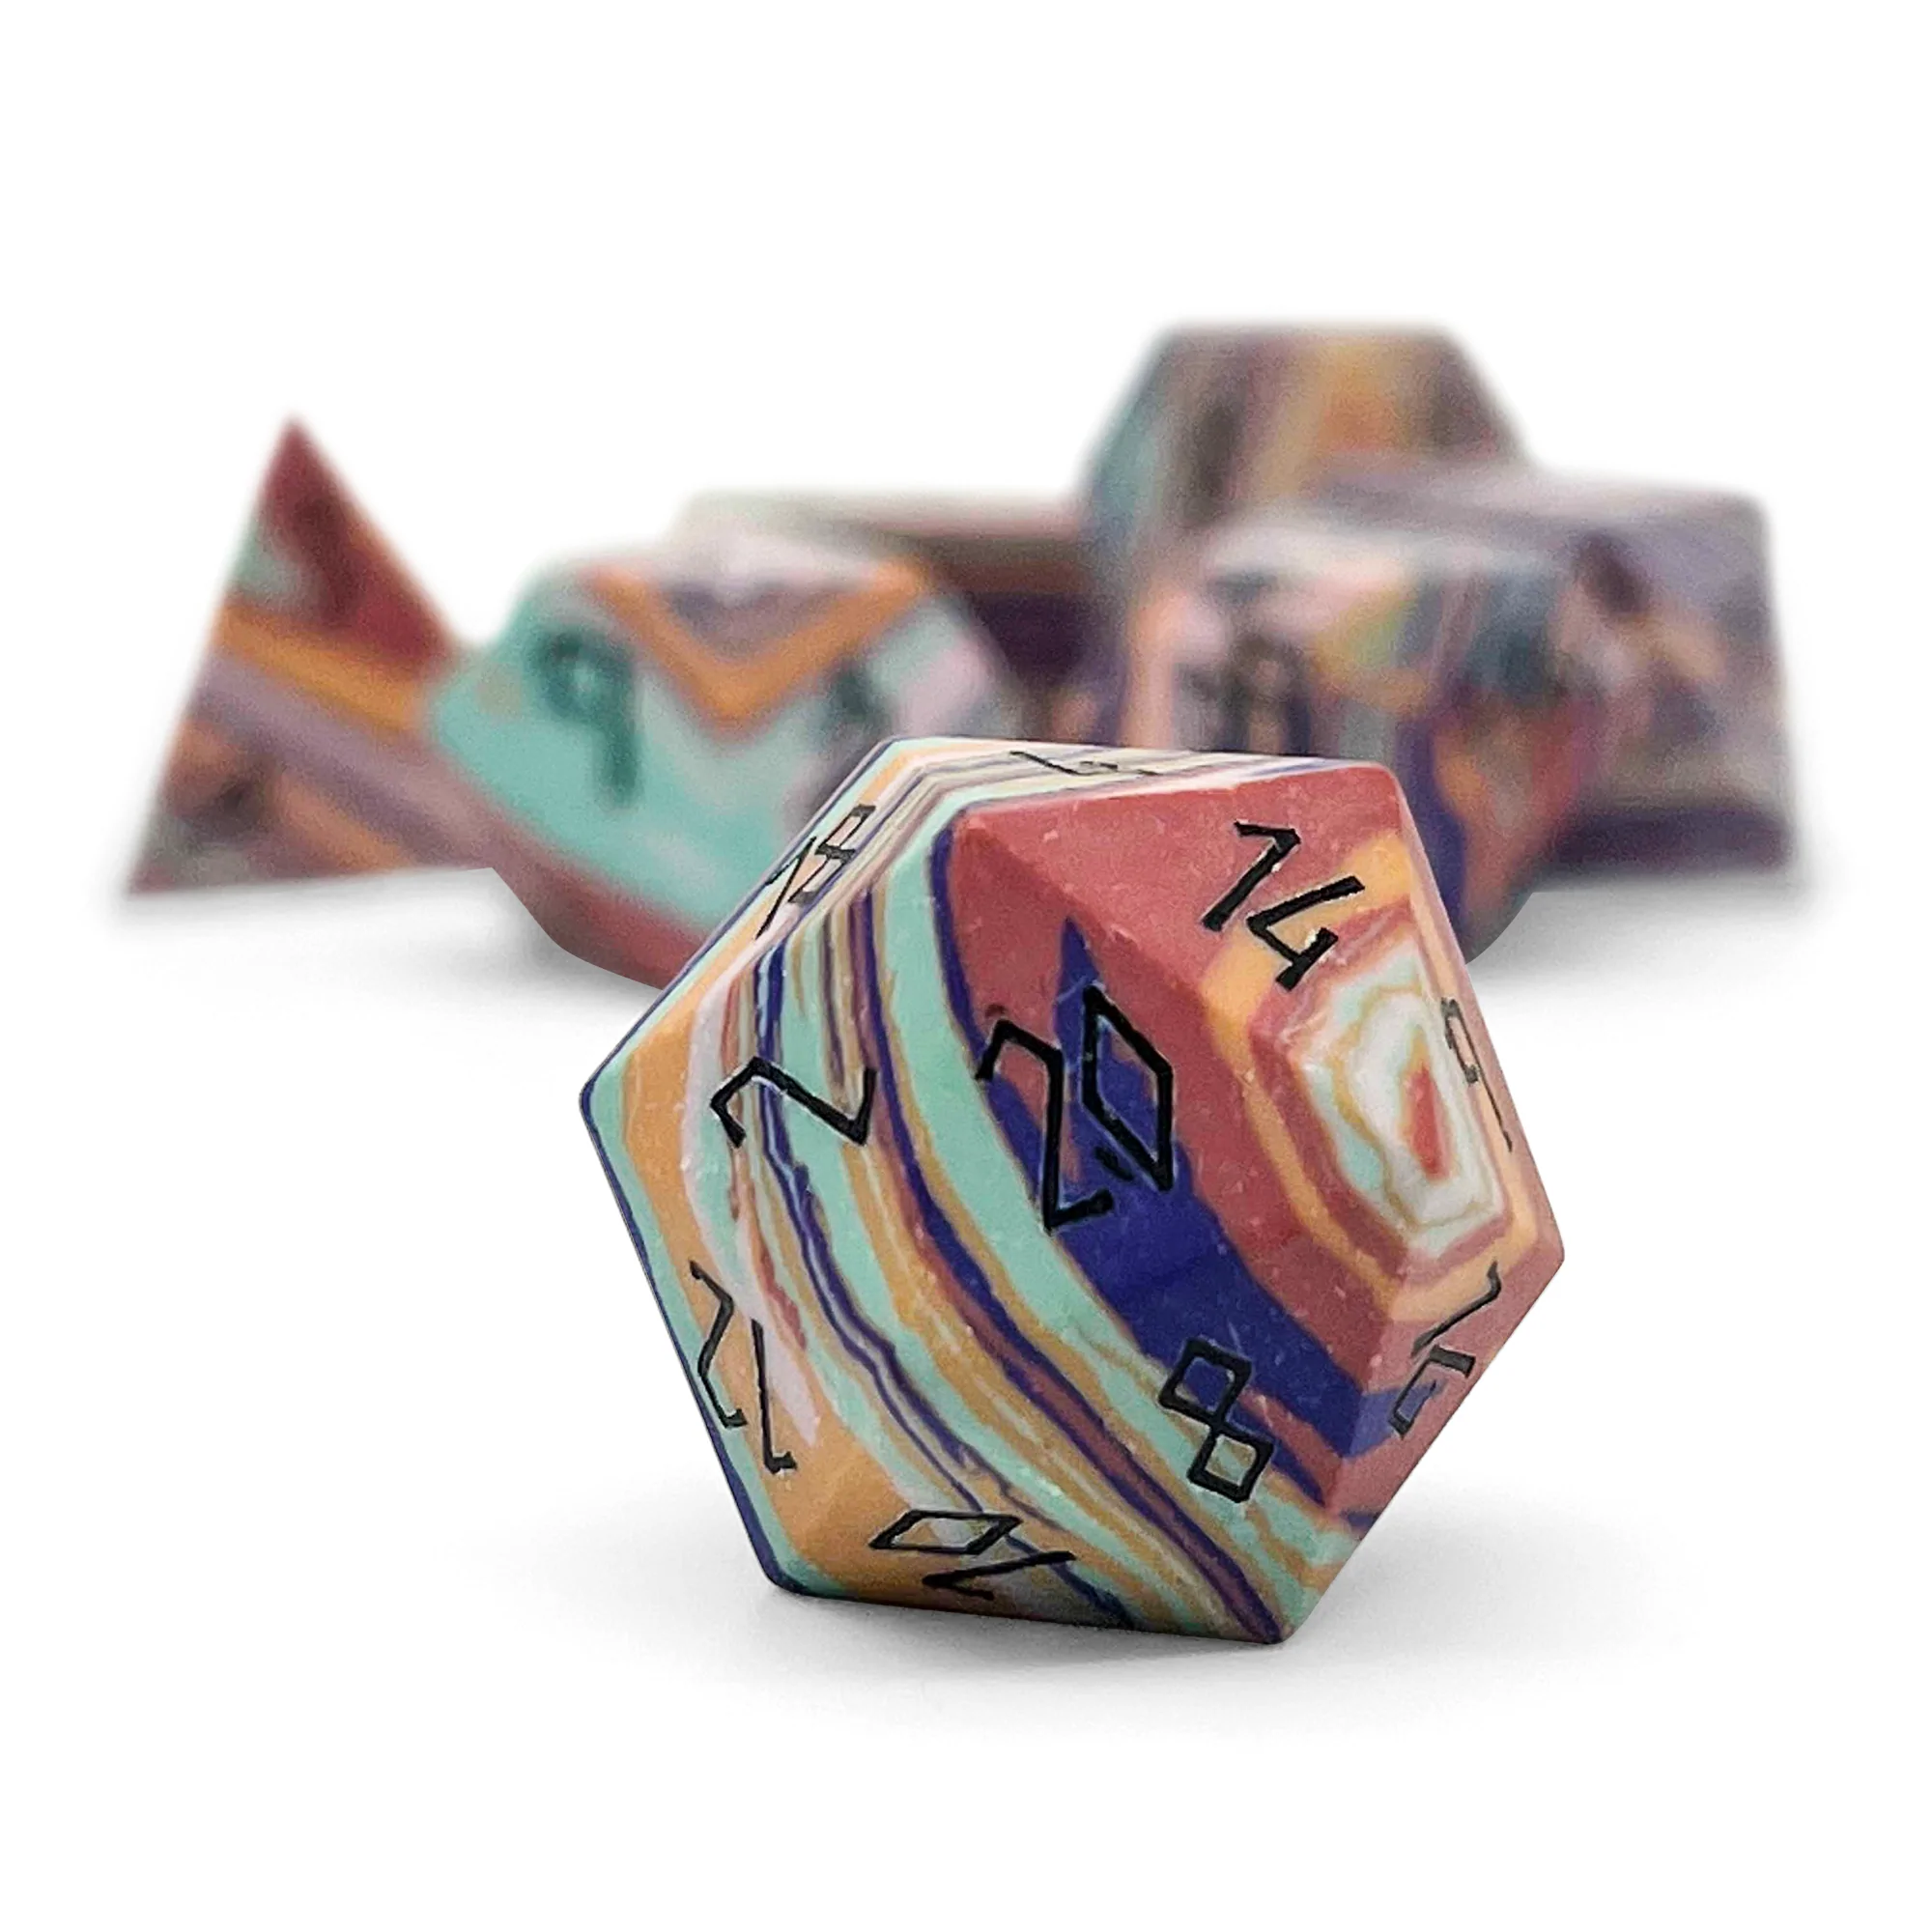 A photo of a set of seven banded rainbow turquoise dice with black numbers on the faces. 